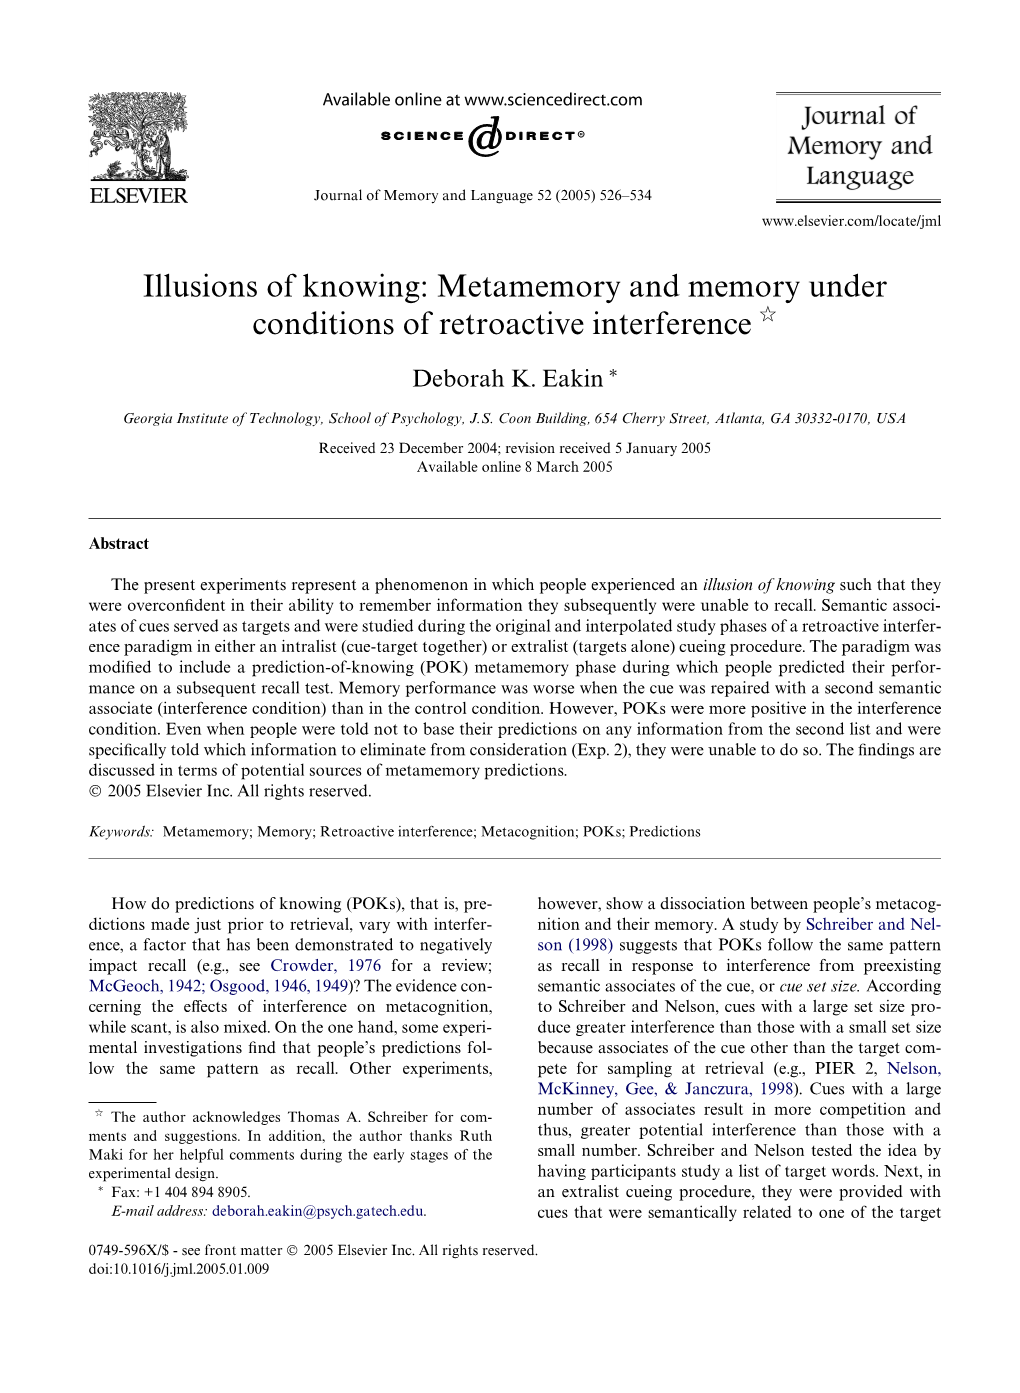 Metamemory and Memory Under Conditions of Retroactive Interference ଝ